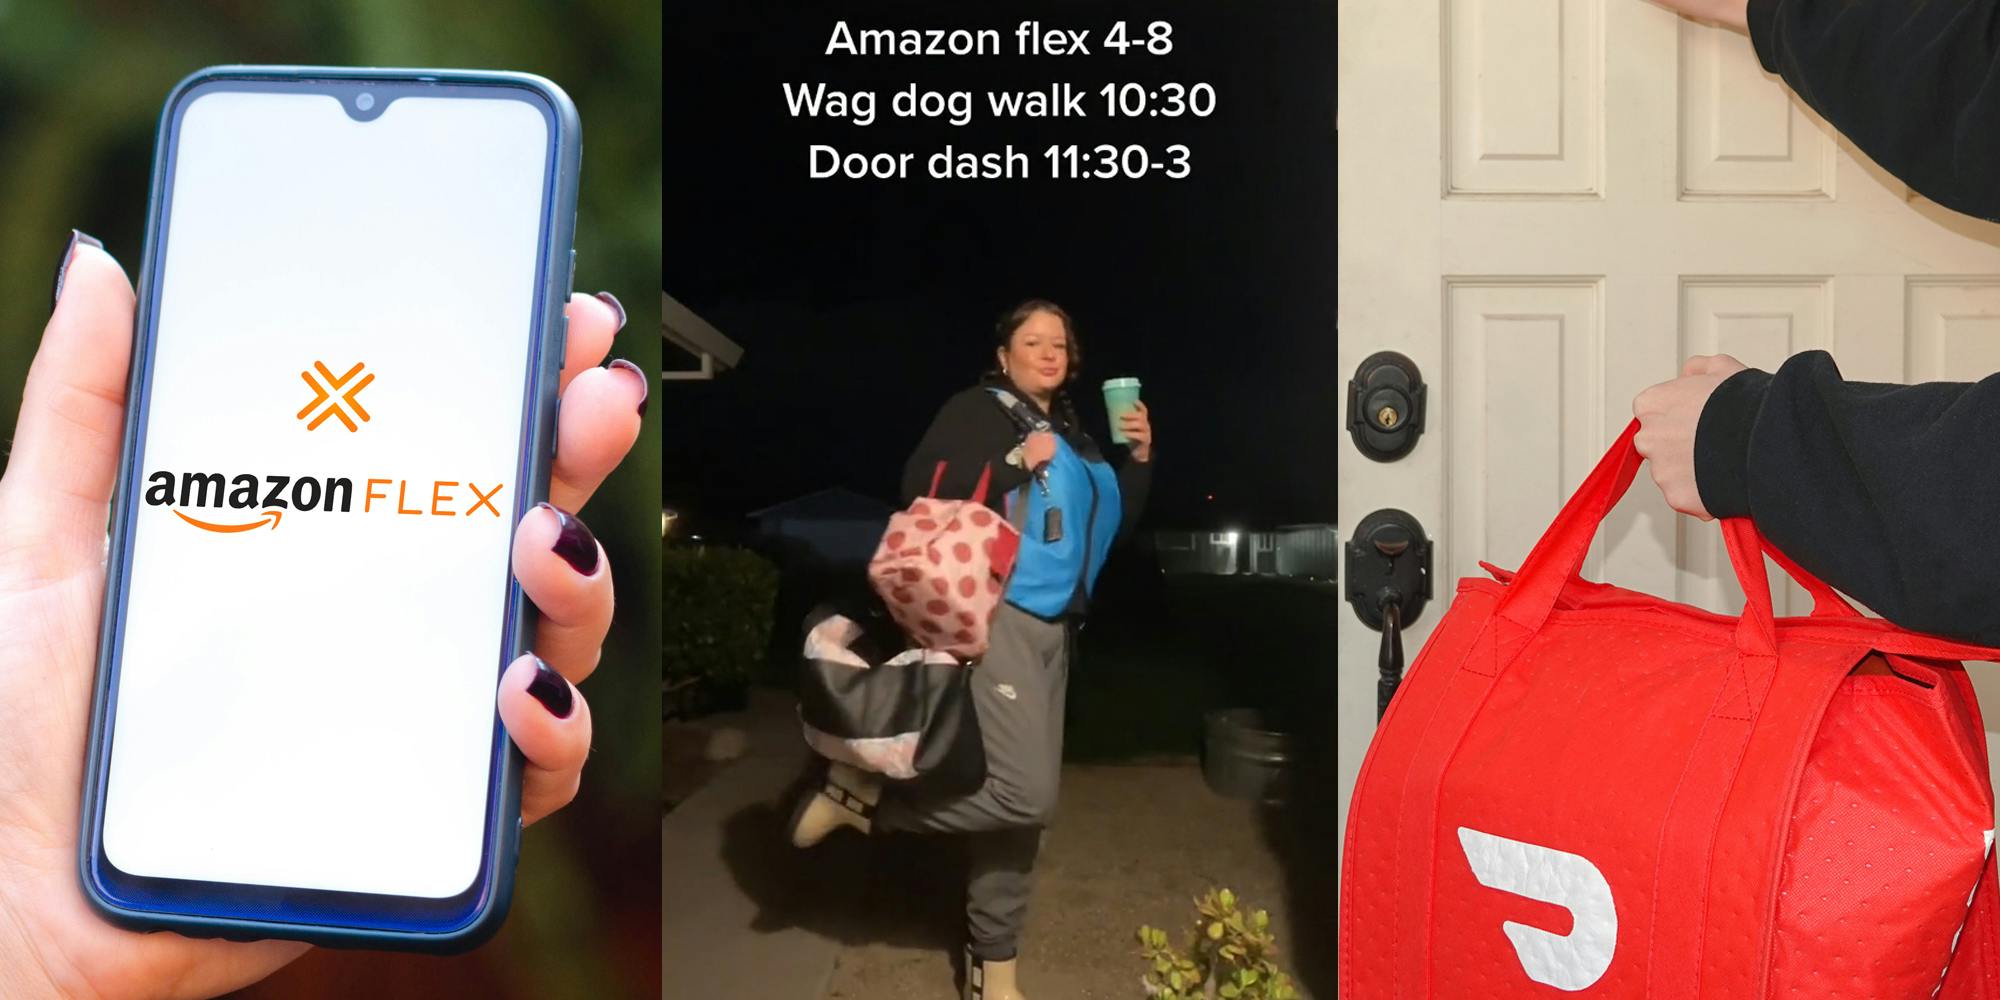 hand holding phone with Amazon Flex on screen outside (l) independent contractor outside with caption "Amazon flex 4-8 Wag dog walk 10:30 Door dash 11:30-3" (c) DoorDash driver knocking on door holding branded bag (r)